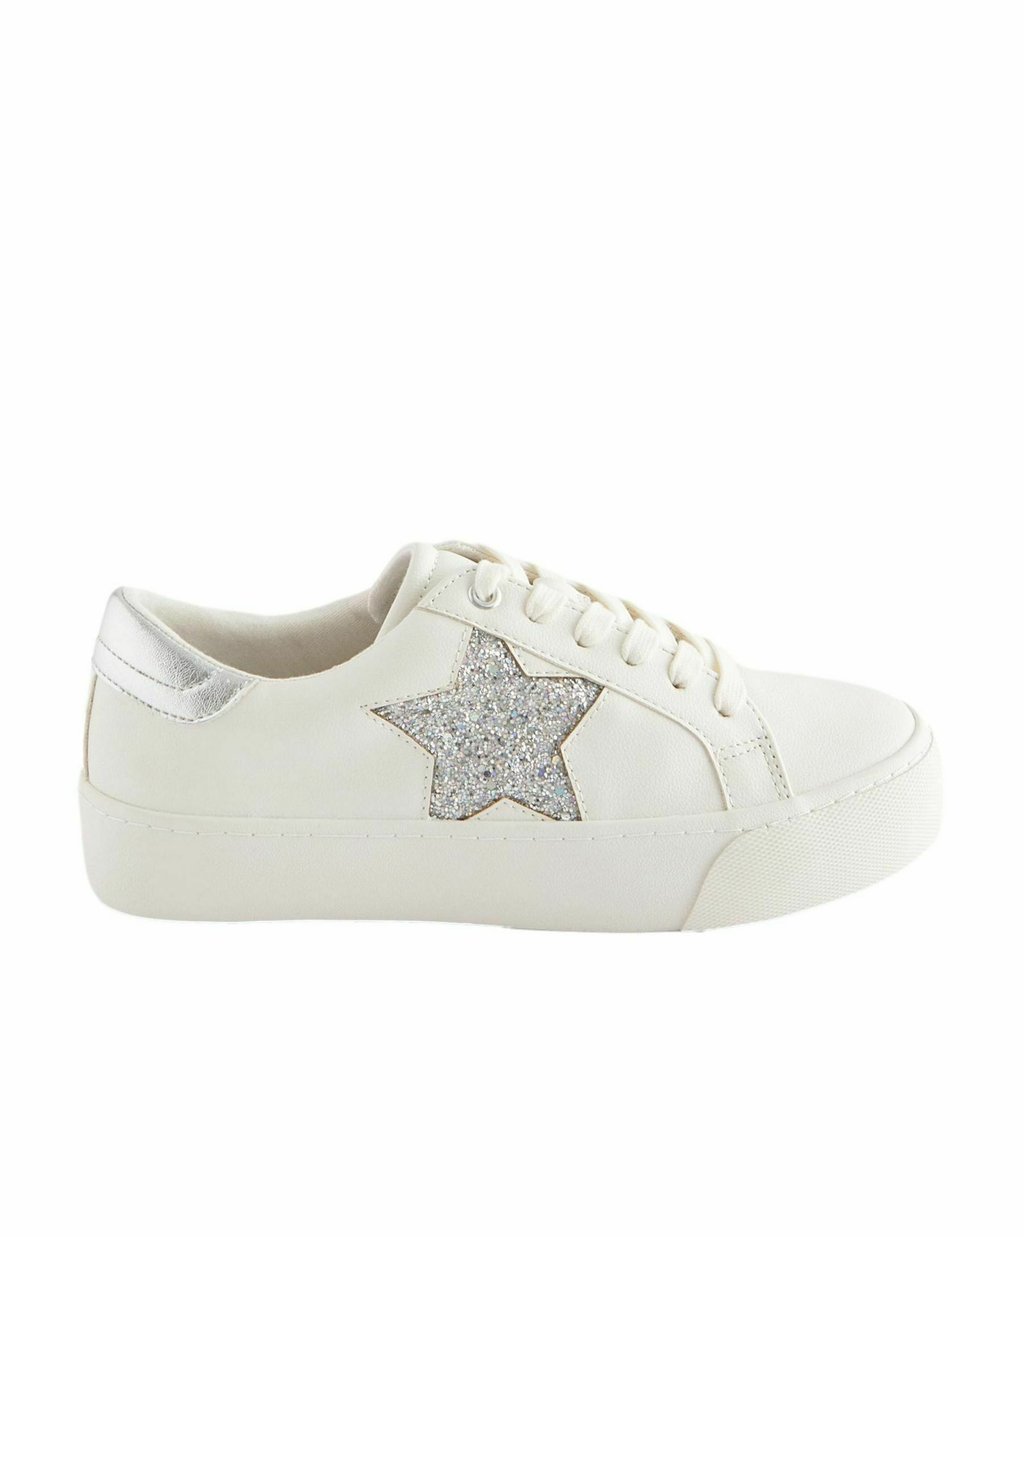 кроссовки next forever comfort embroidered star white silver Низкие кроссовки Forever Comfort Chunky Star Regular Fit Next, цвет white silver